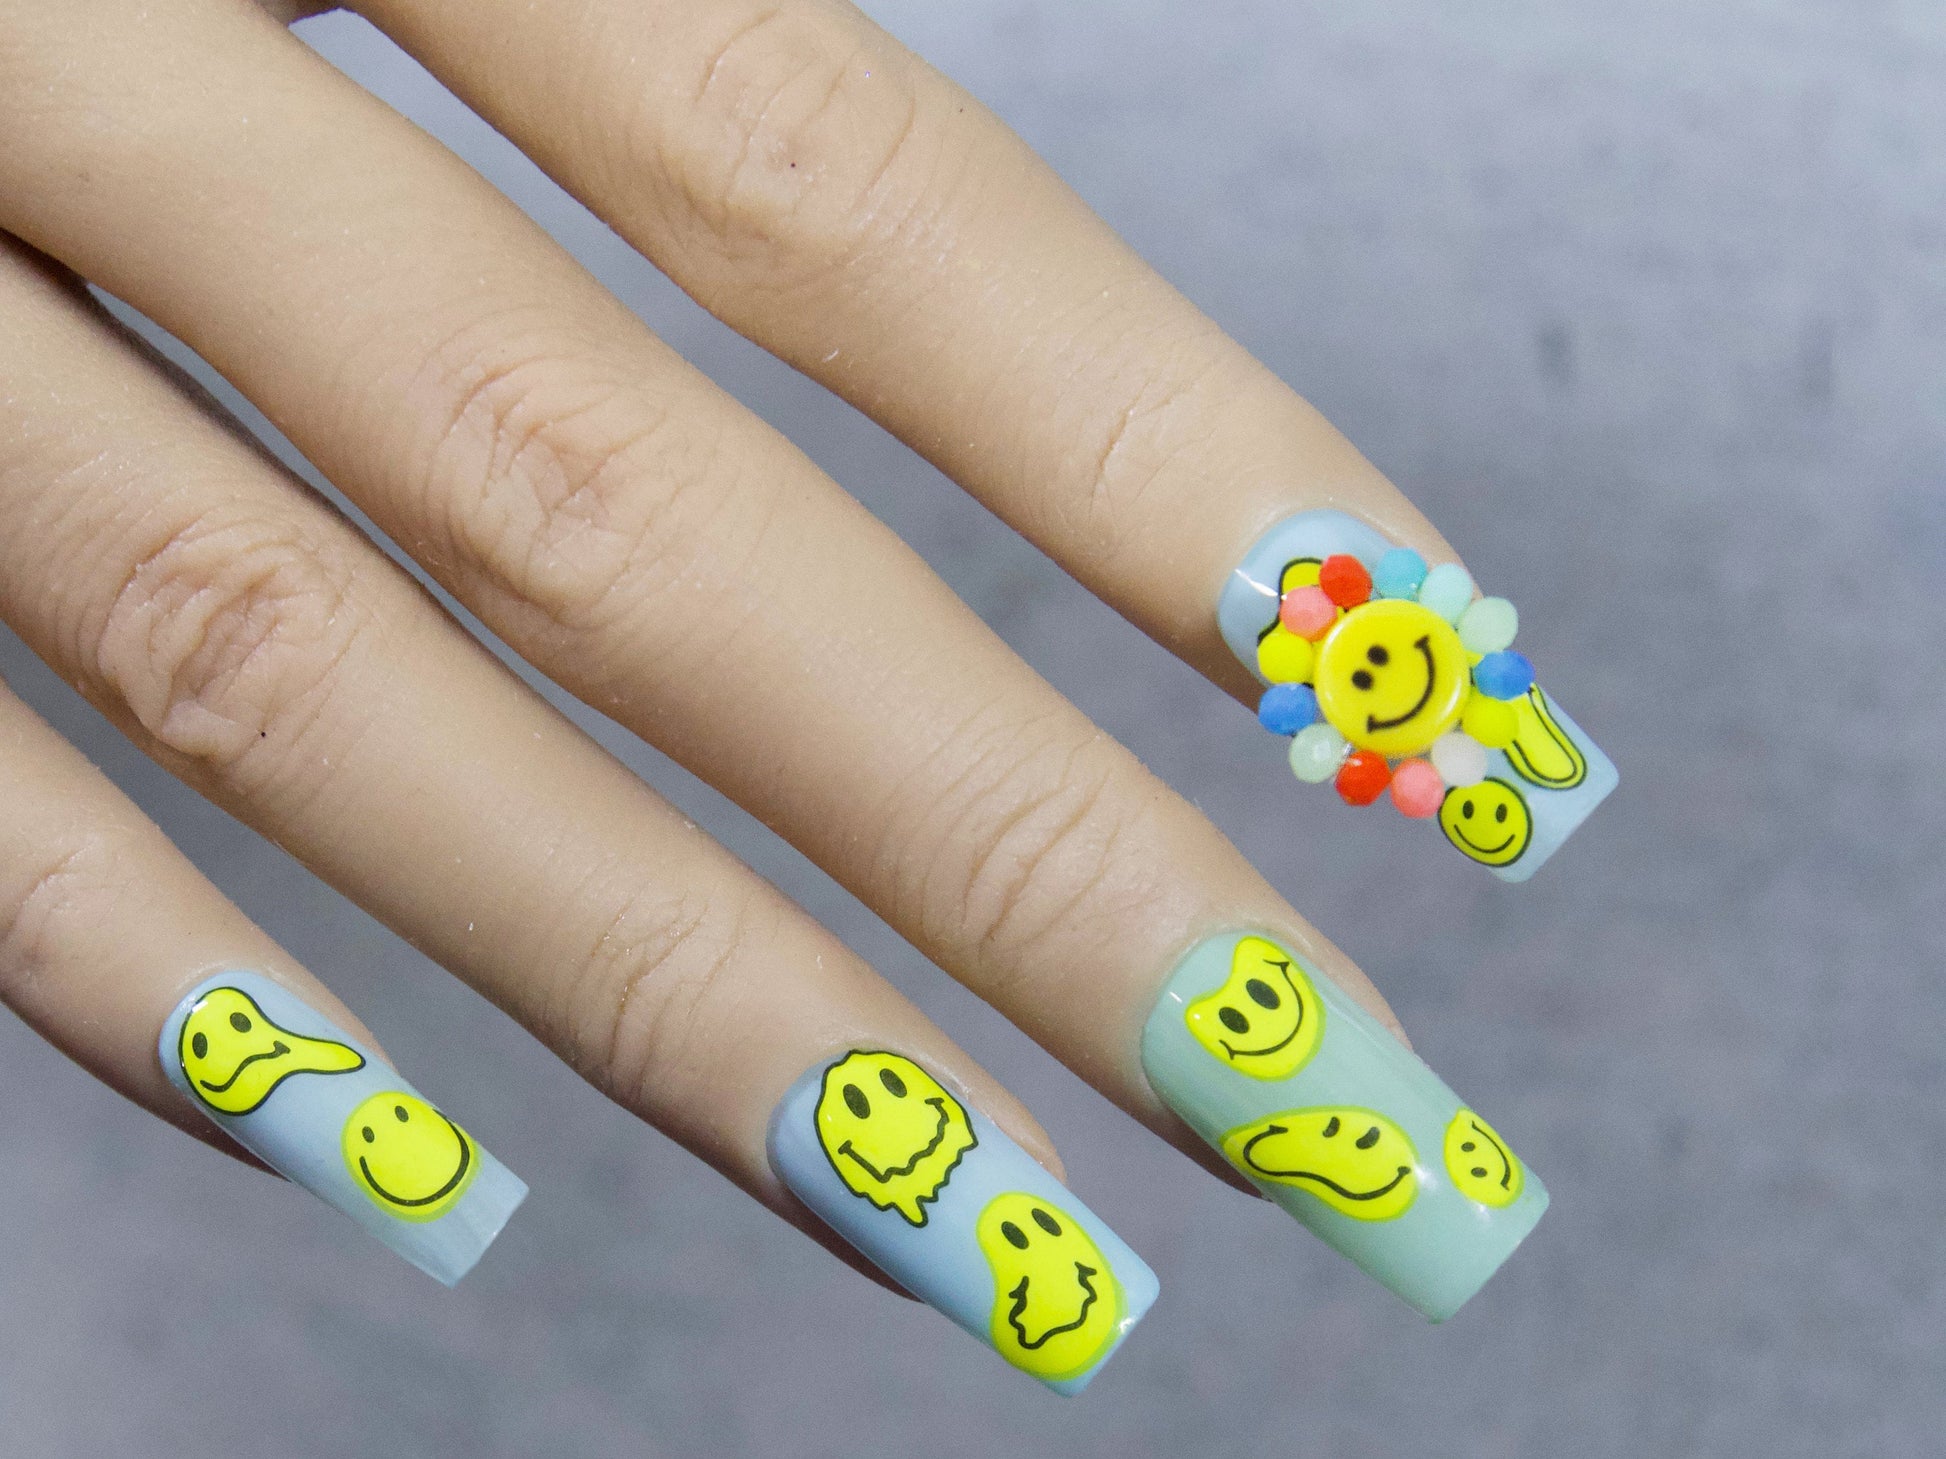 Melted Smile Happy Face Nail sticker/ Smiley Emoji Nail Art Stickers Self Adhesive Decals/ Smiley Face Yellow Manicure stencil